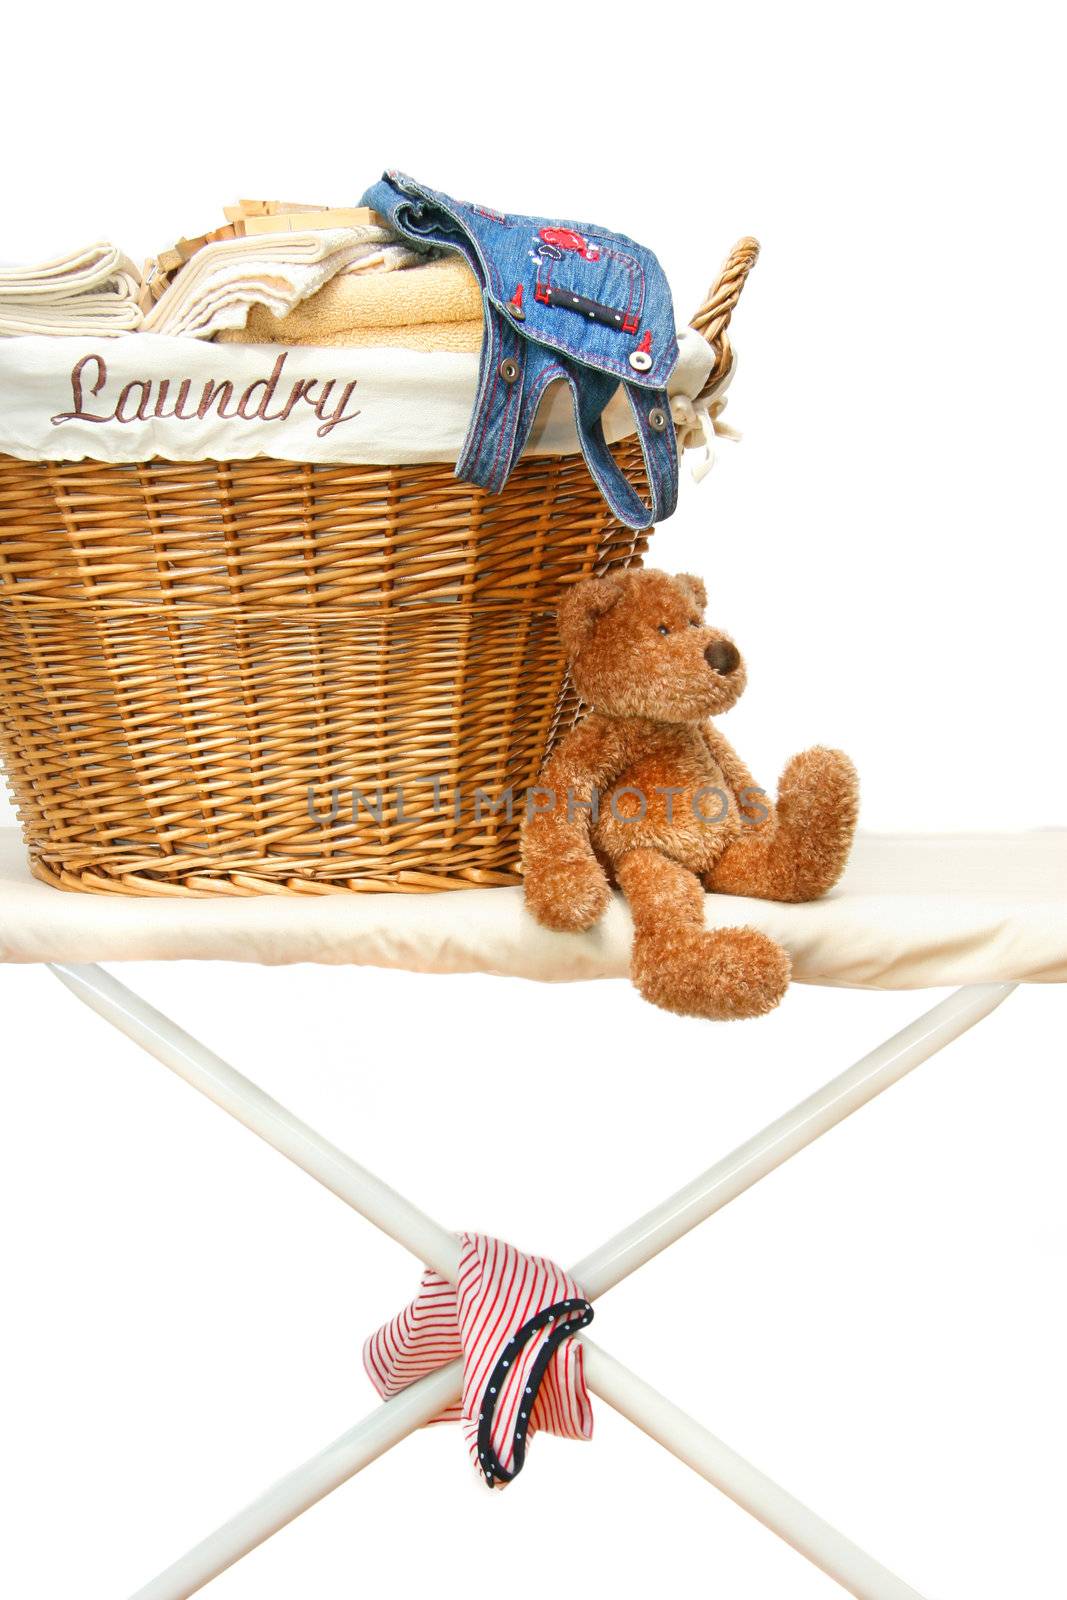 Teddy bear with laundry basket on ironing board  by Sandralise